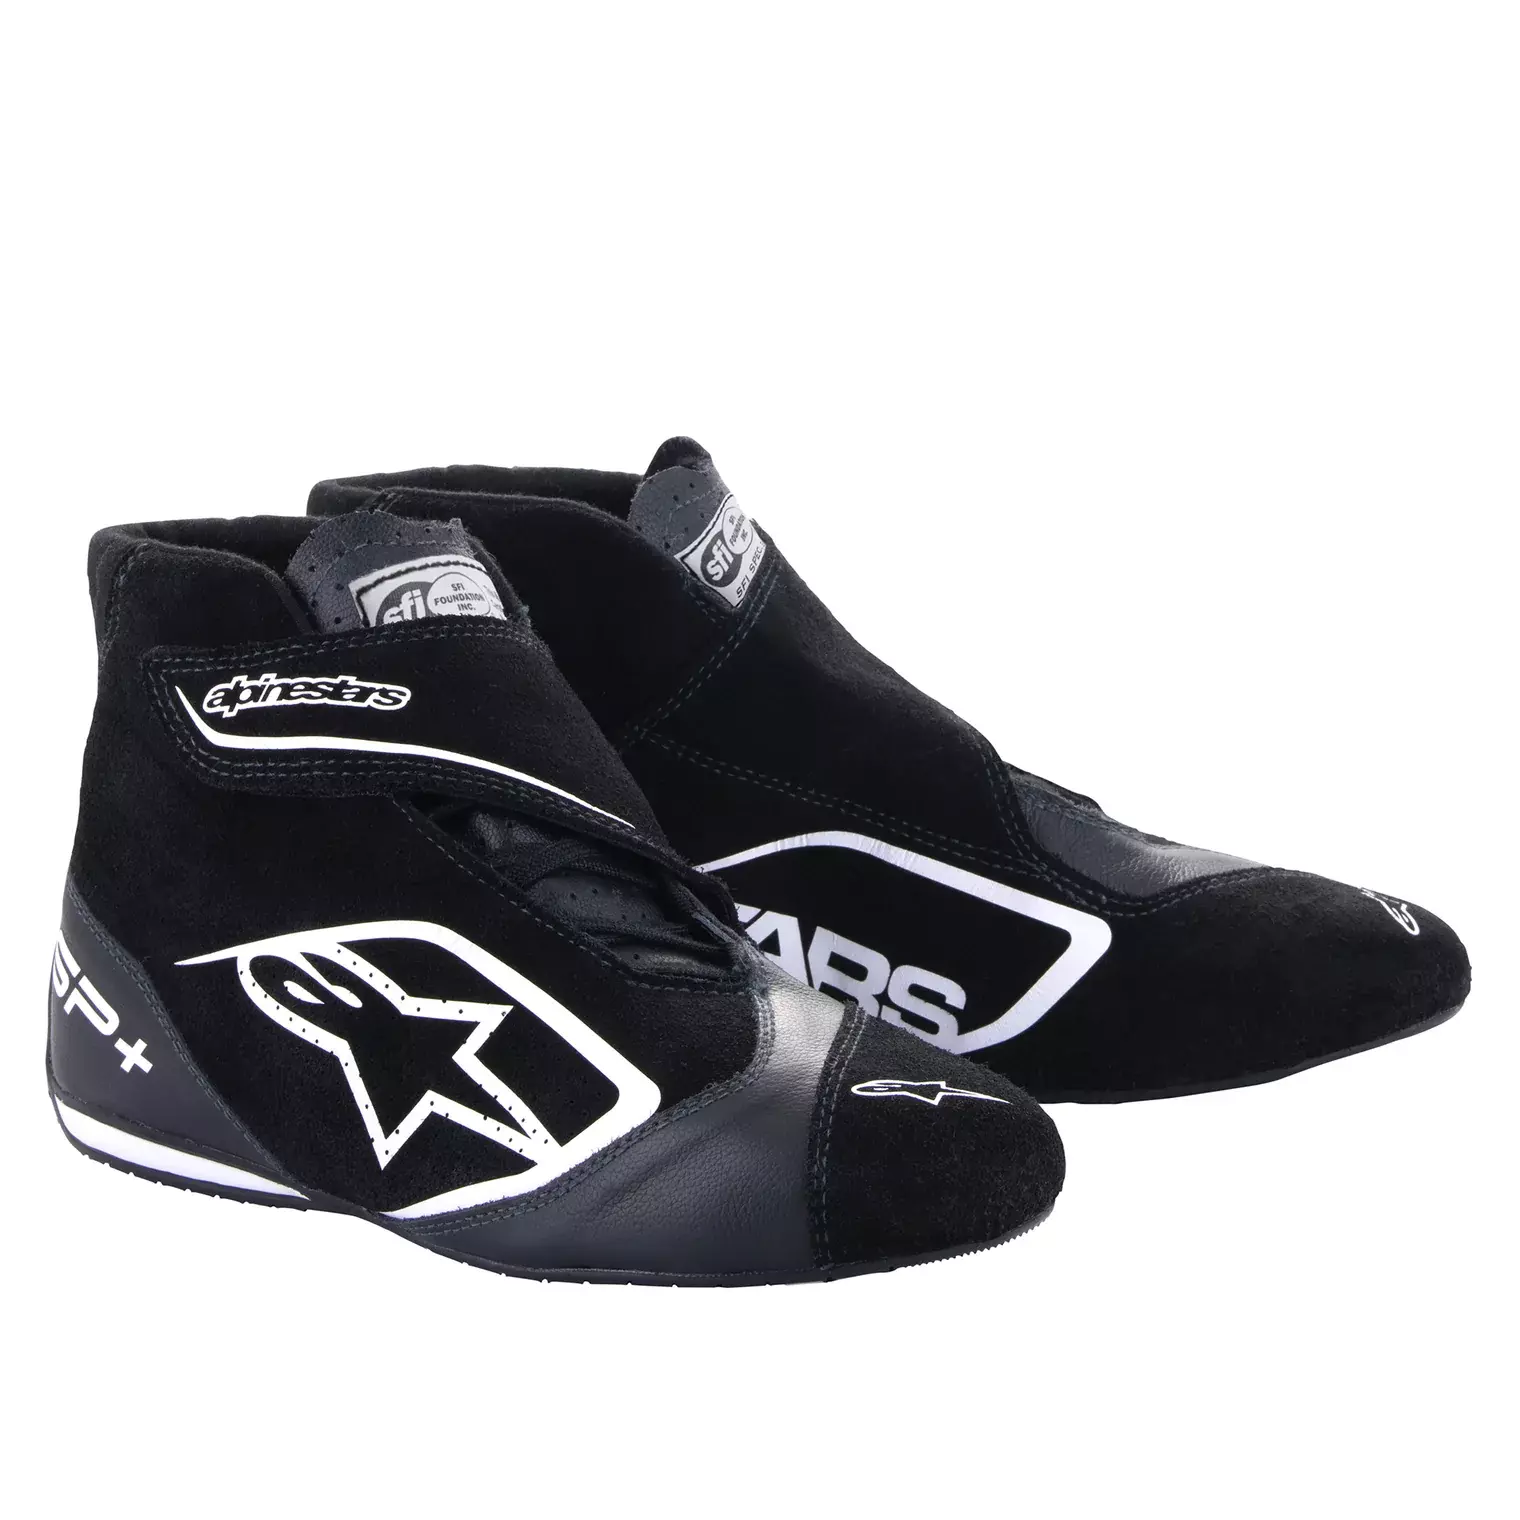 Alpinestars 2710823-12-10 Driving Shoe, SP+, Mid-Top, SFI 3.3, FIA Approved, Suede Outer, Nomex Inner, Black / White, Size 10, Pair